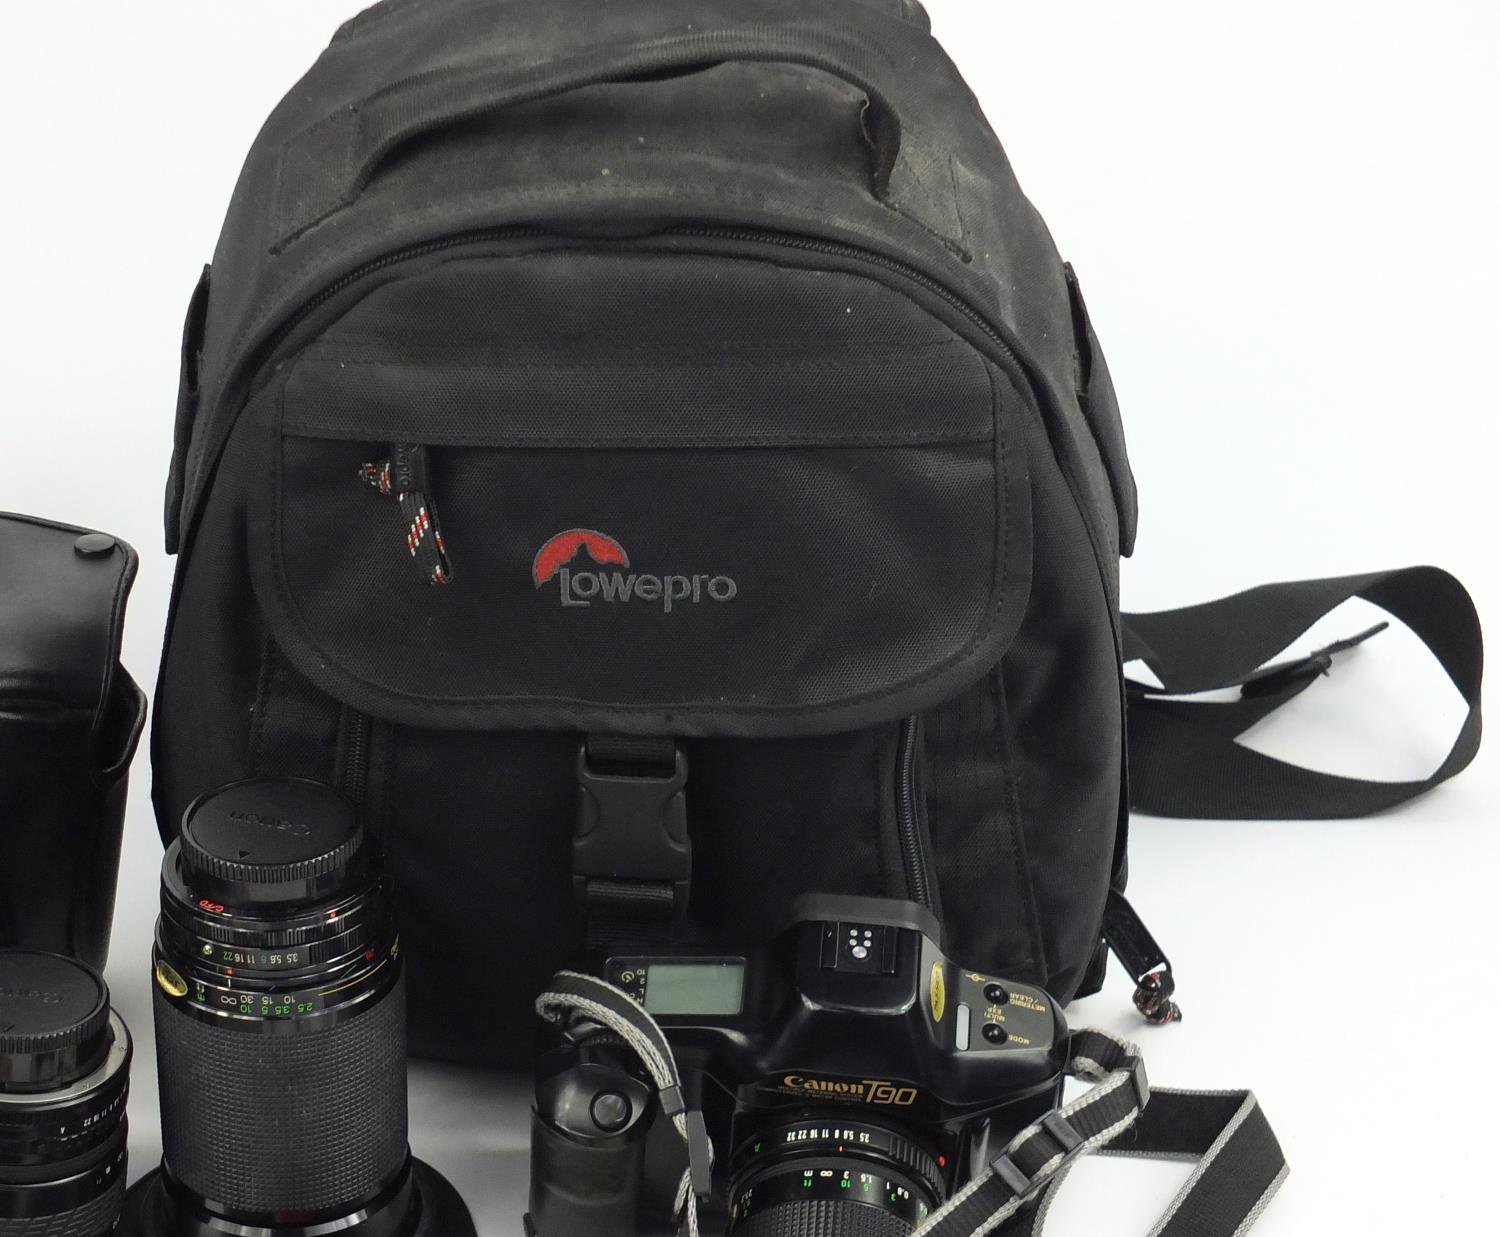 Two Canon camera outfits, Canon T90 and Canon EOS30 bodies with lenses including Tamron, both with - Image 3 of 5